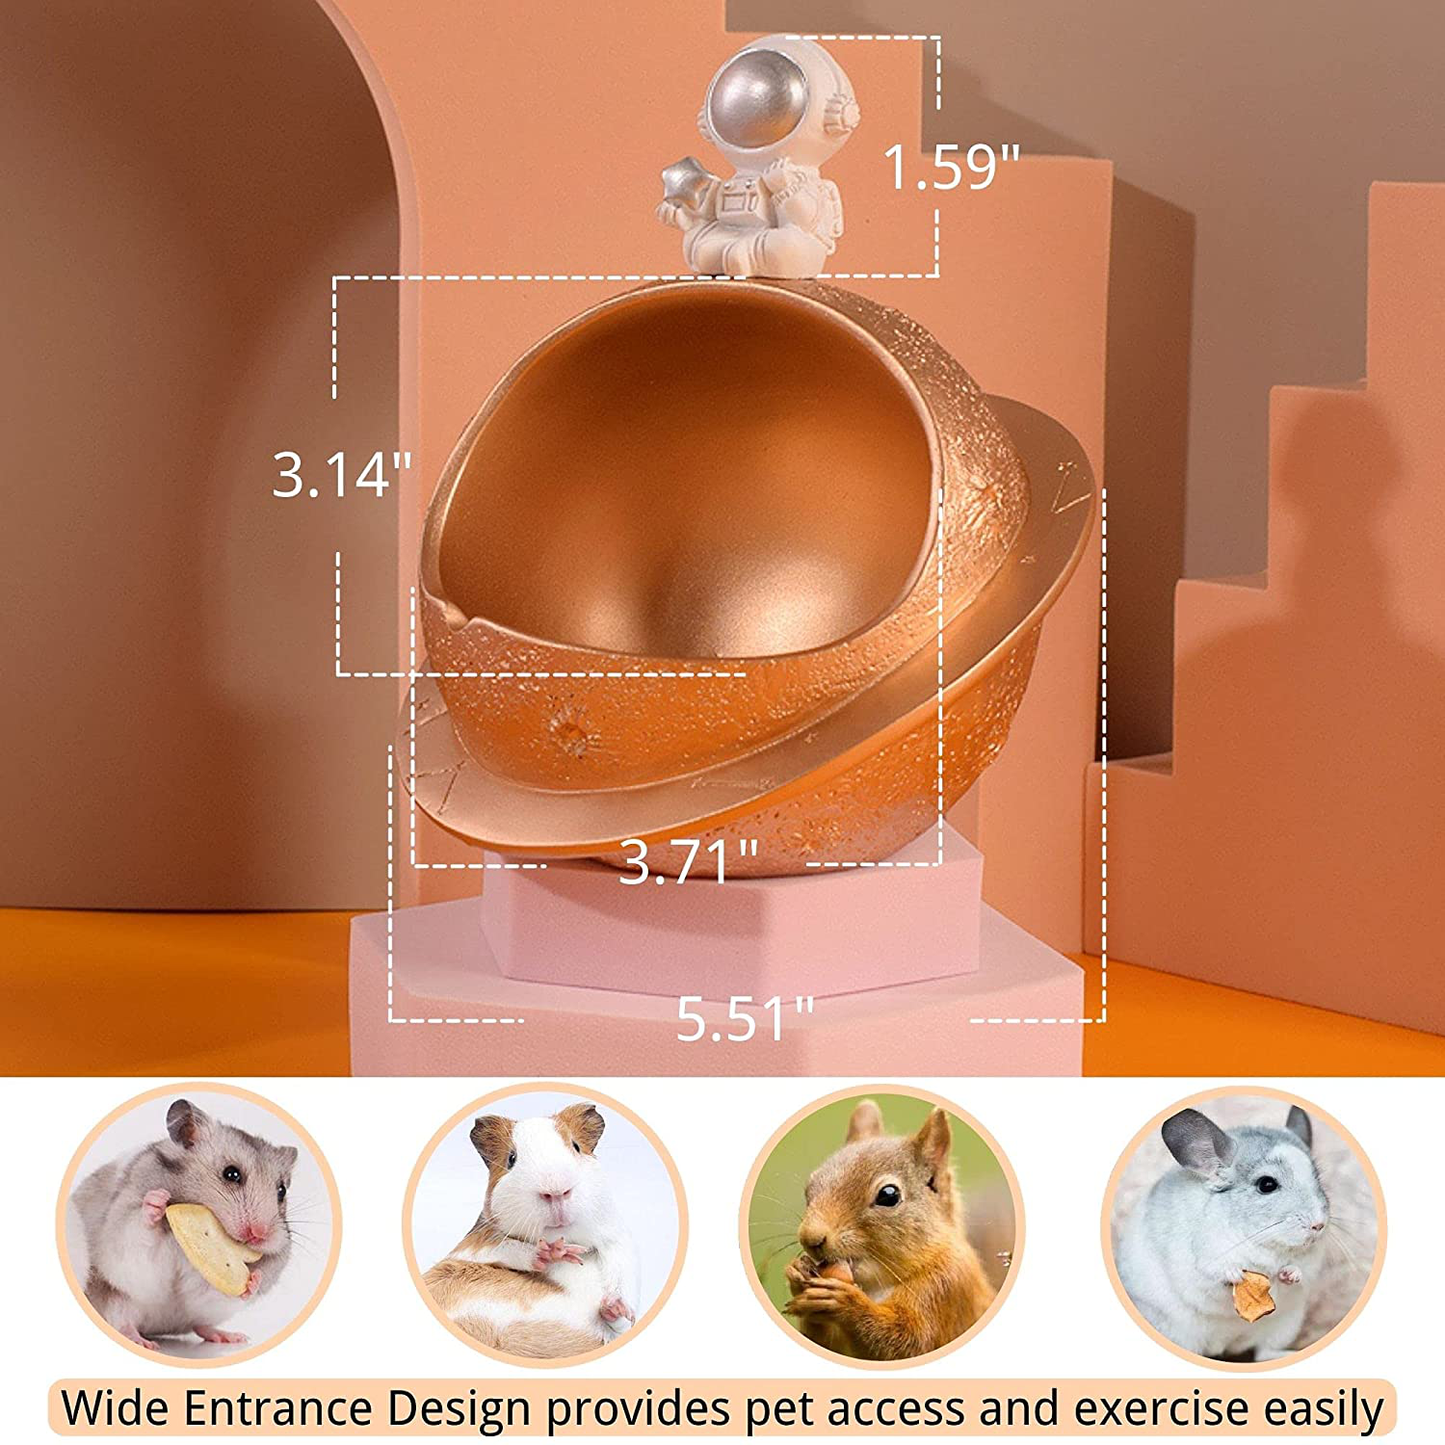 Janyoo Hamster Hideout,Rathut Dwarf Hamster House Bed Chinchilla for Gerbils Mice Small Animal Cage Habitat Decor Resin Room